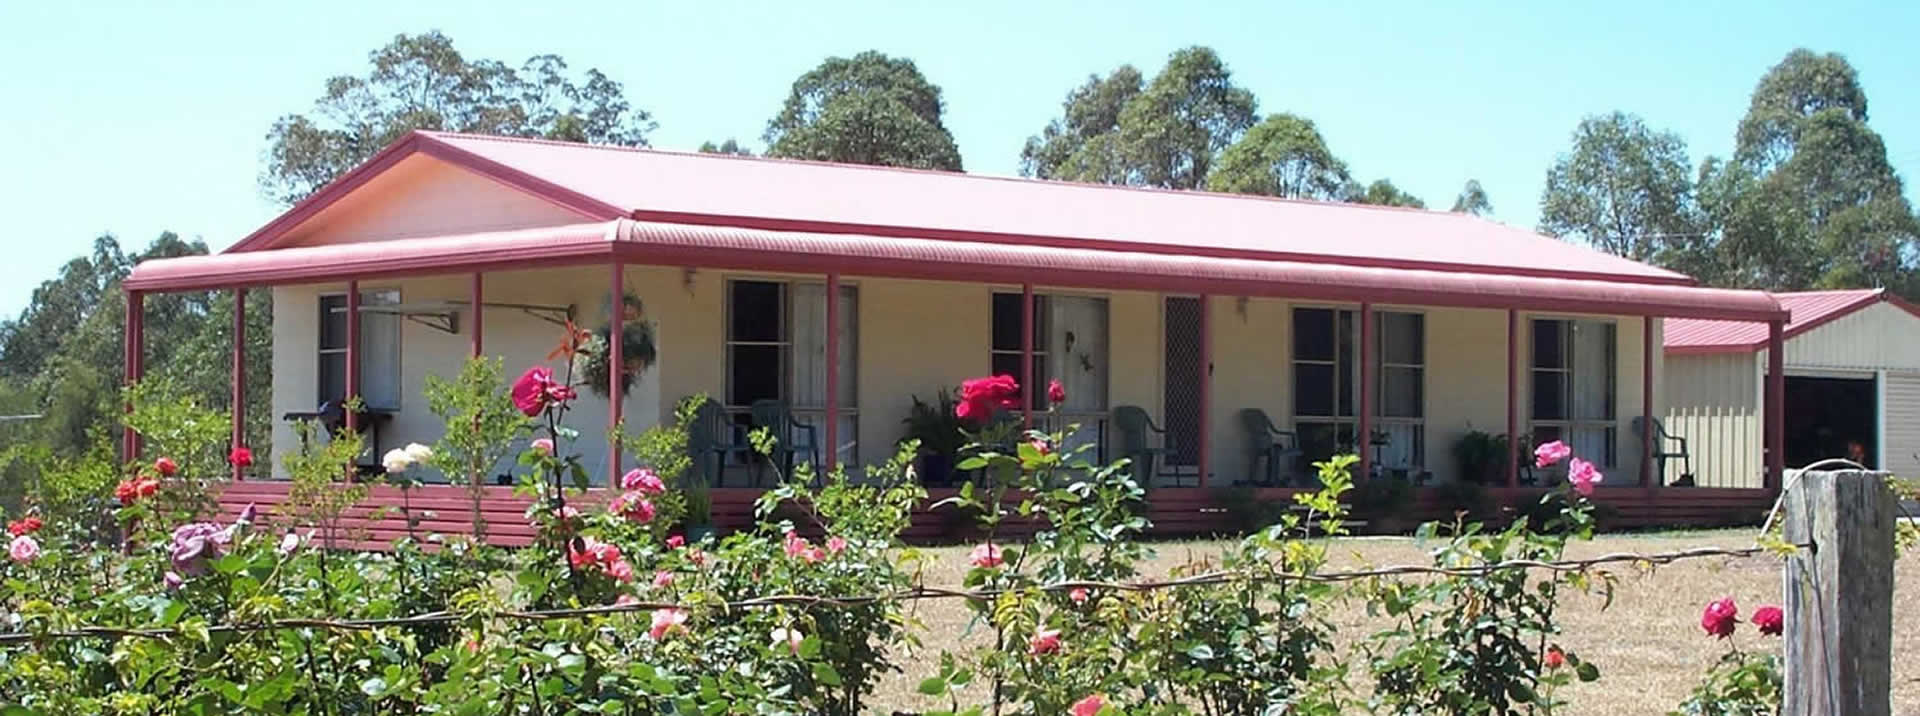 The exterior of a colonial relocatable home in NSW